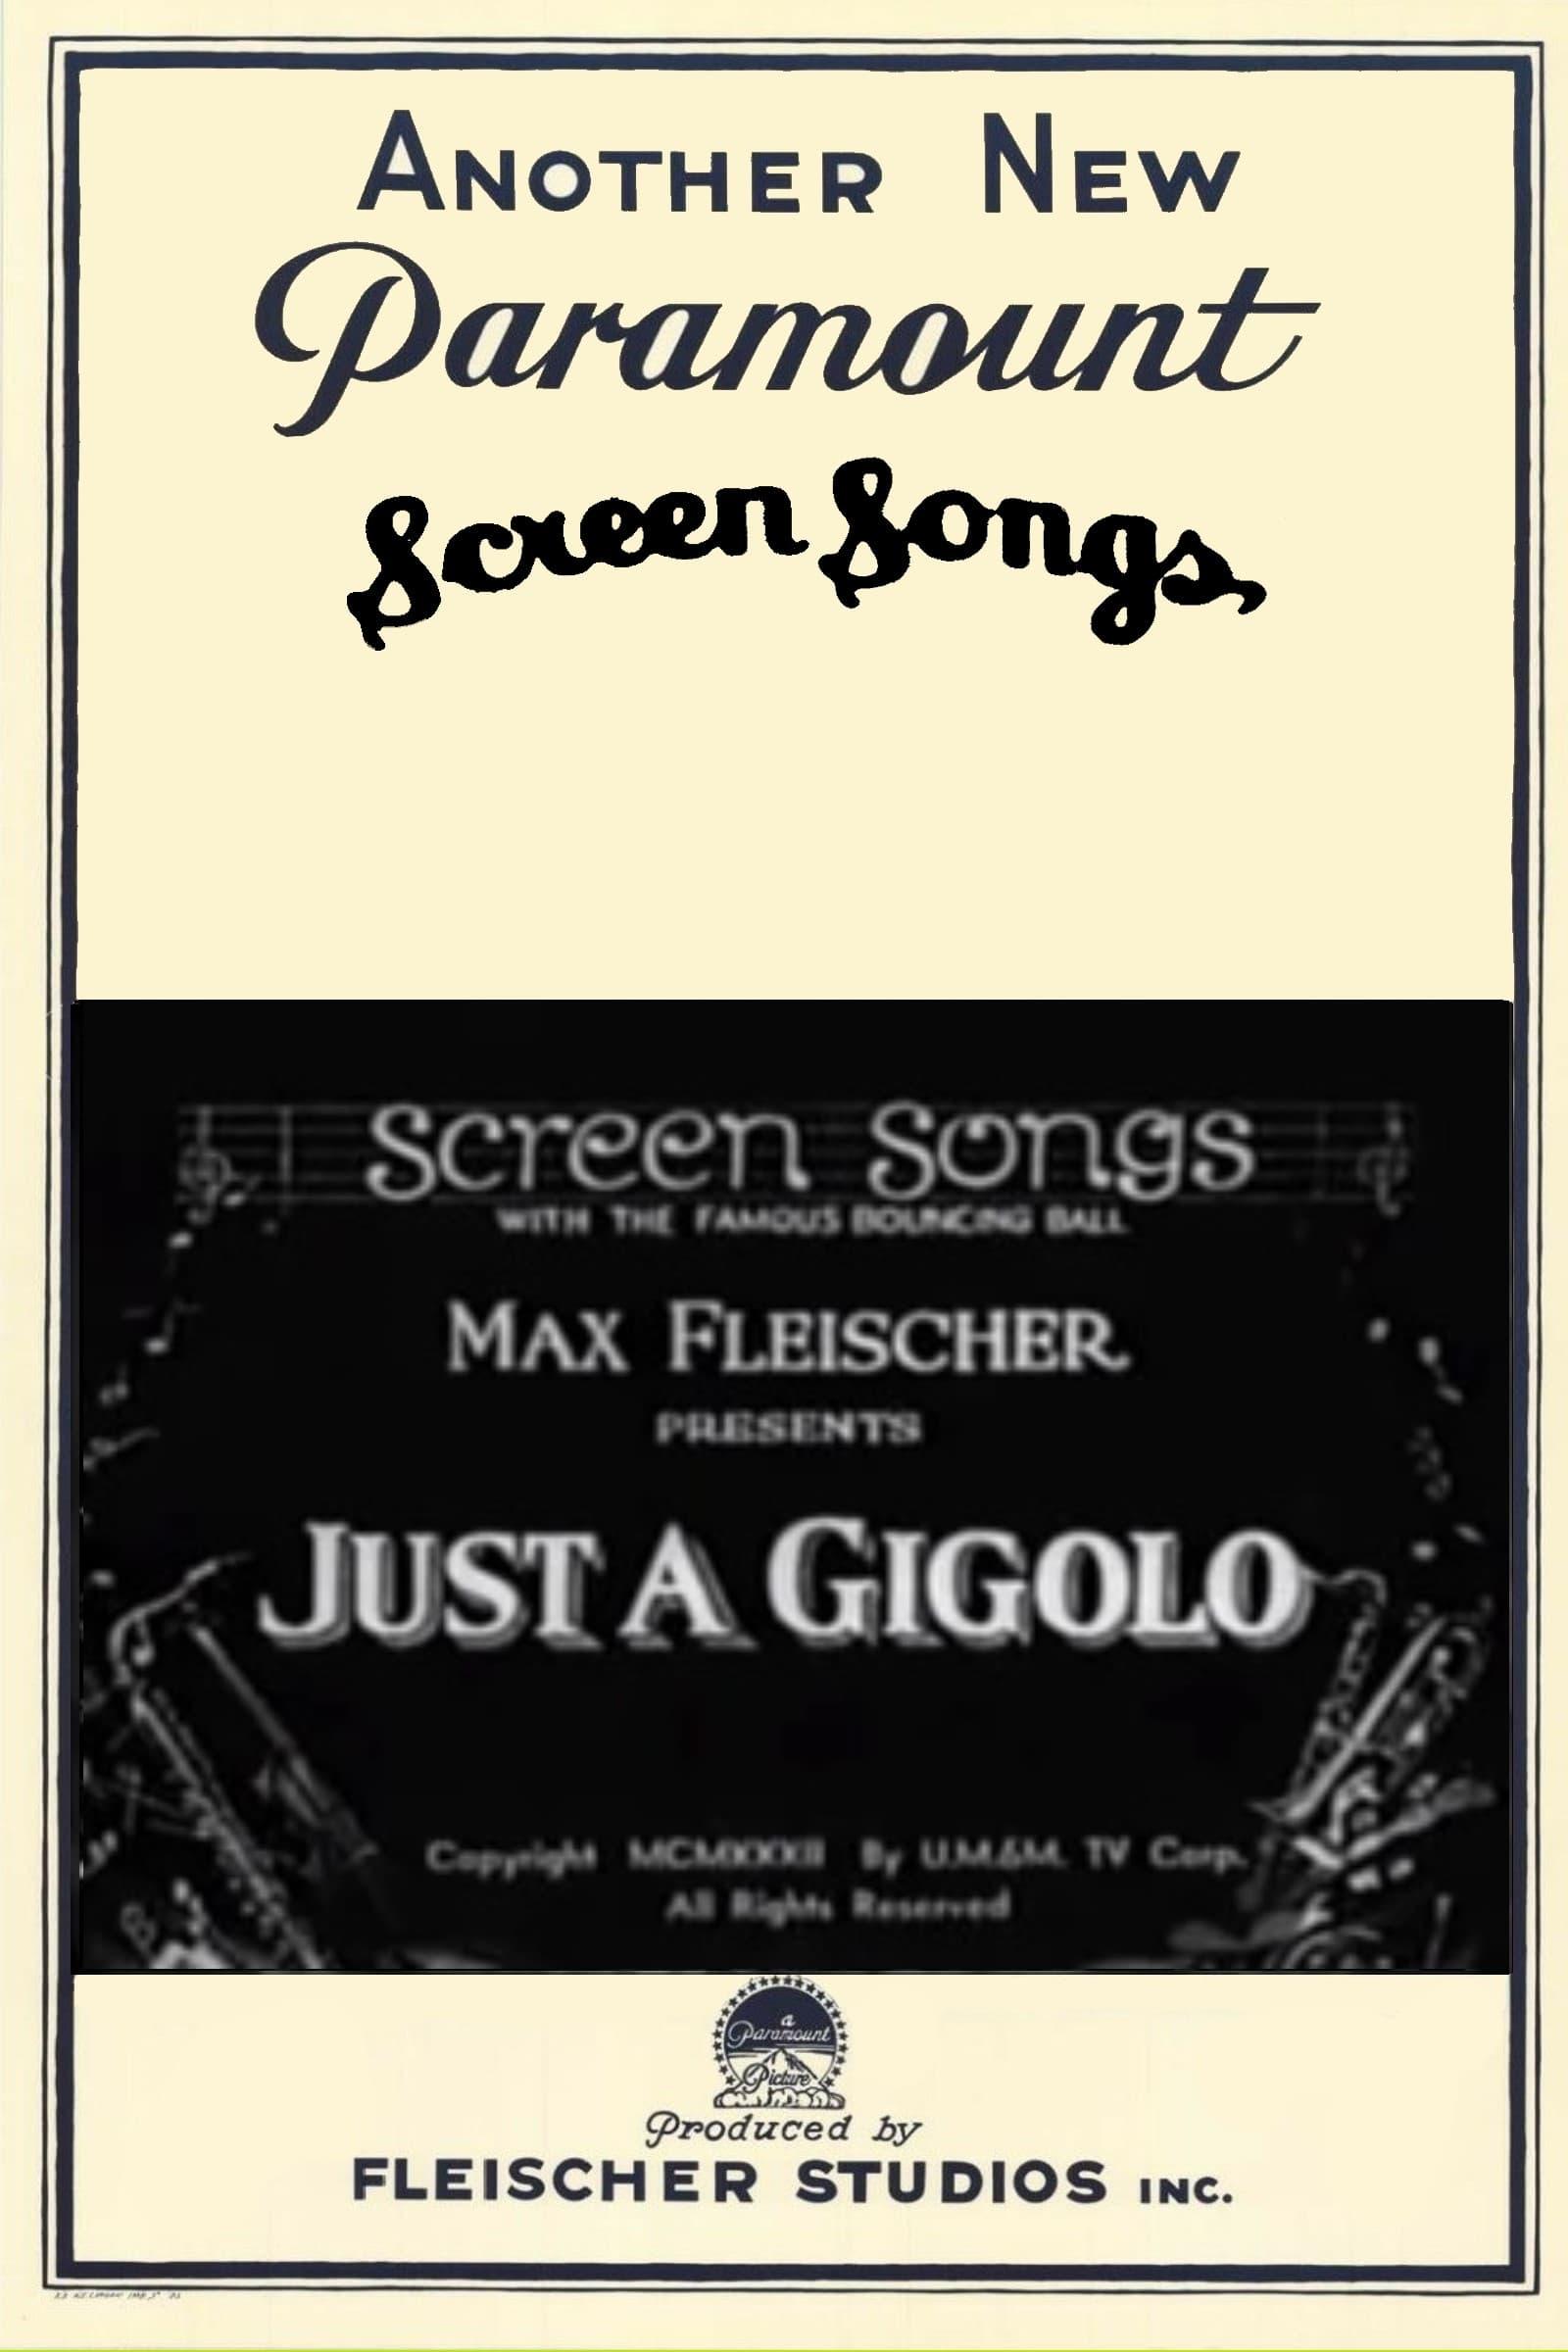 Just a Gigolo poster